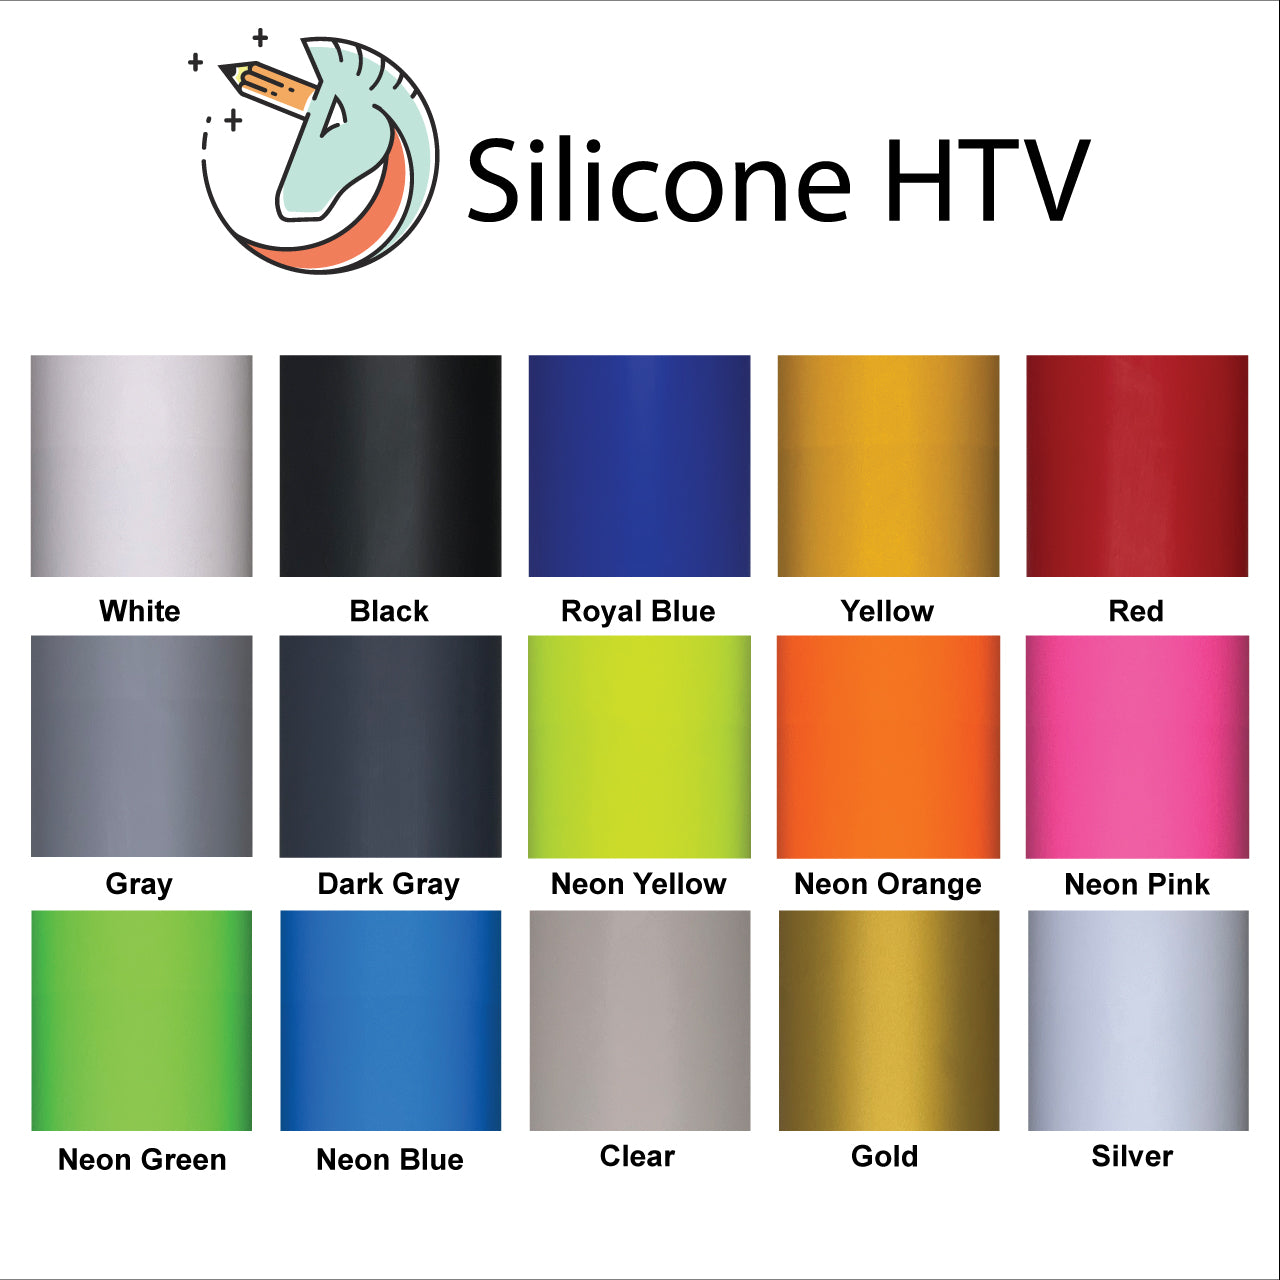 Silver Silicone Heat Transfer Vinyl Sheets By Craftables